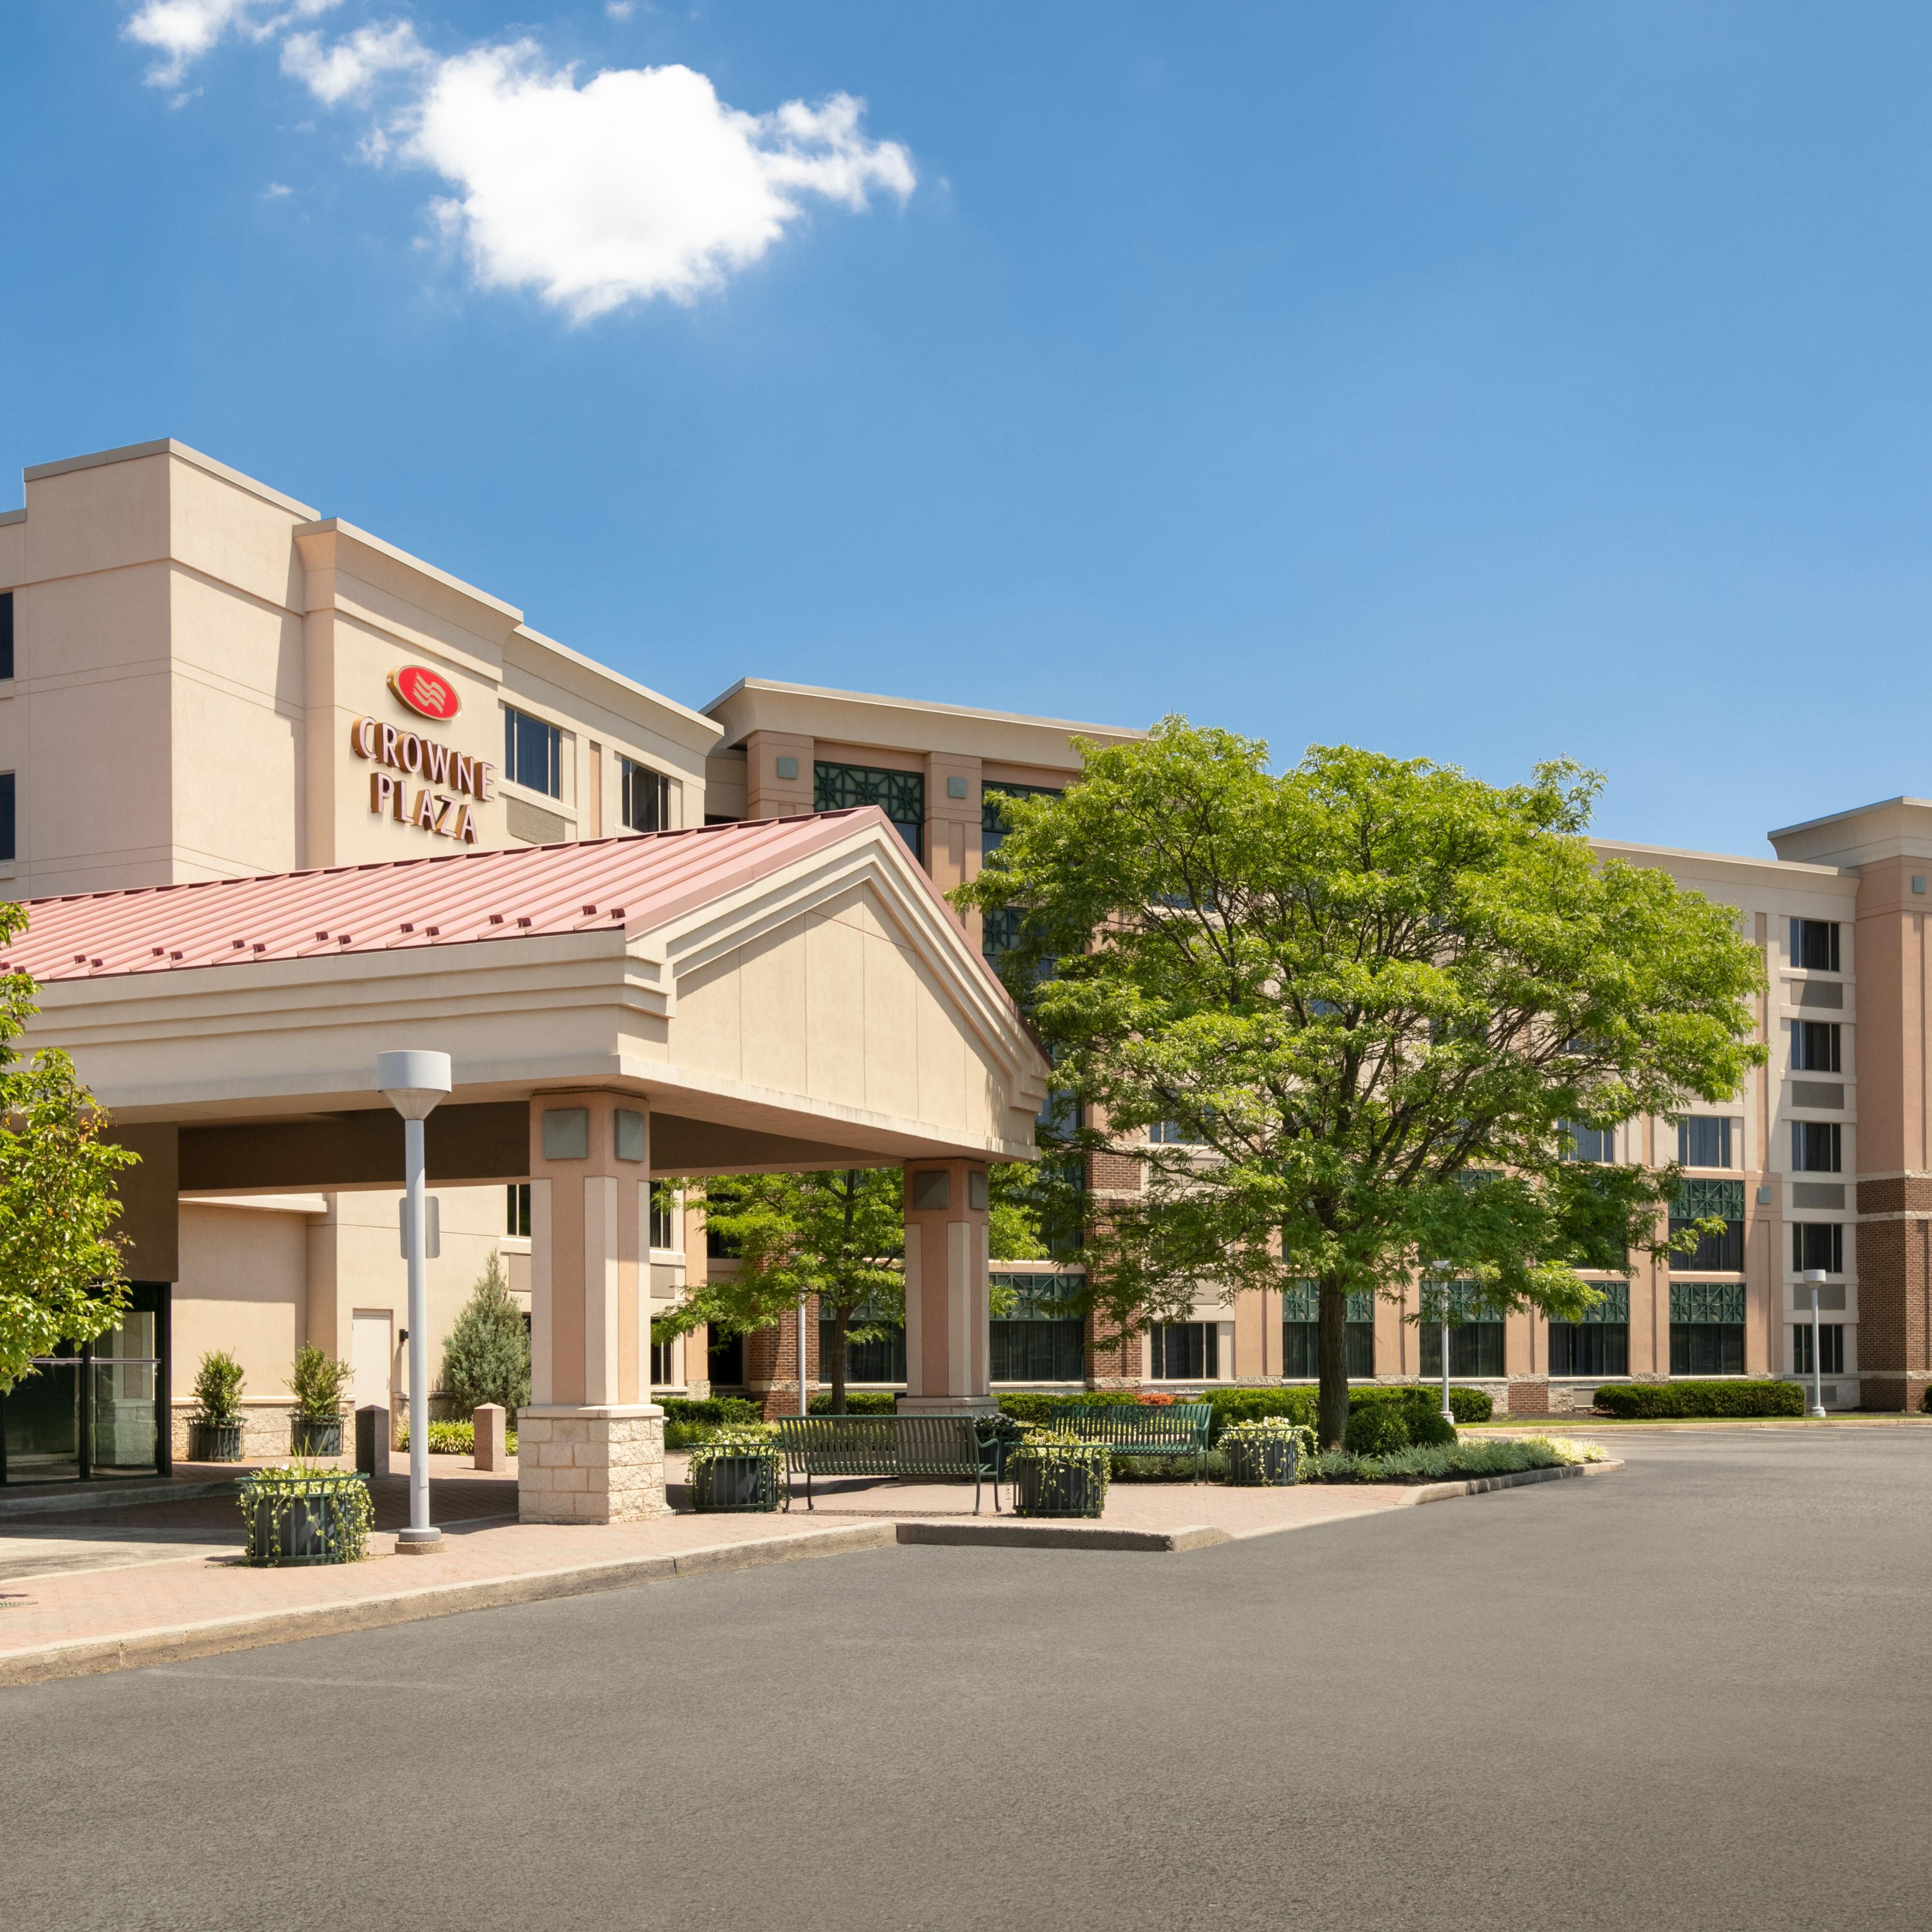 Our Philadelphia area hotel sits next to King of Prussia Mall.